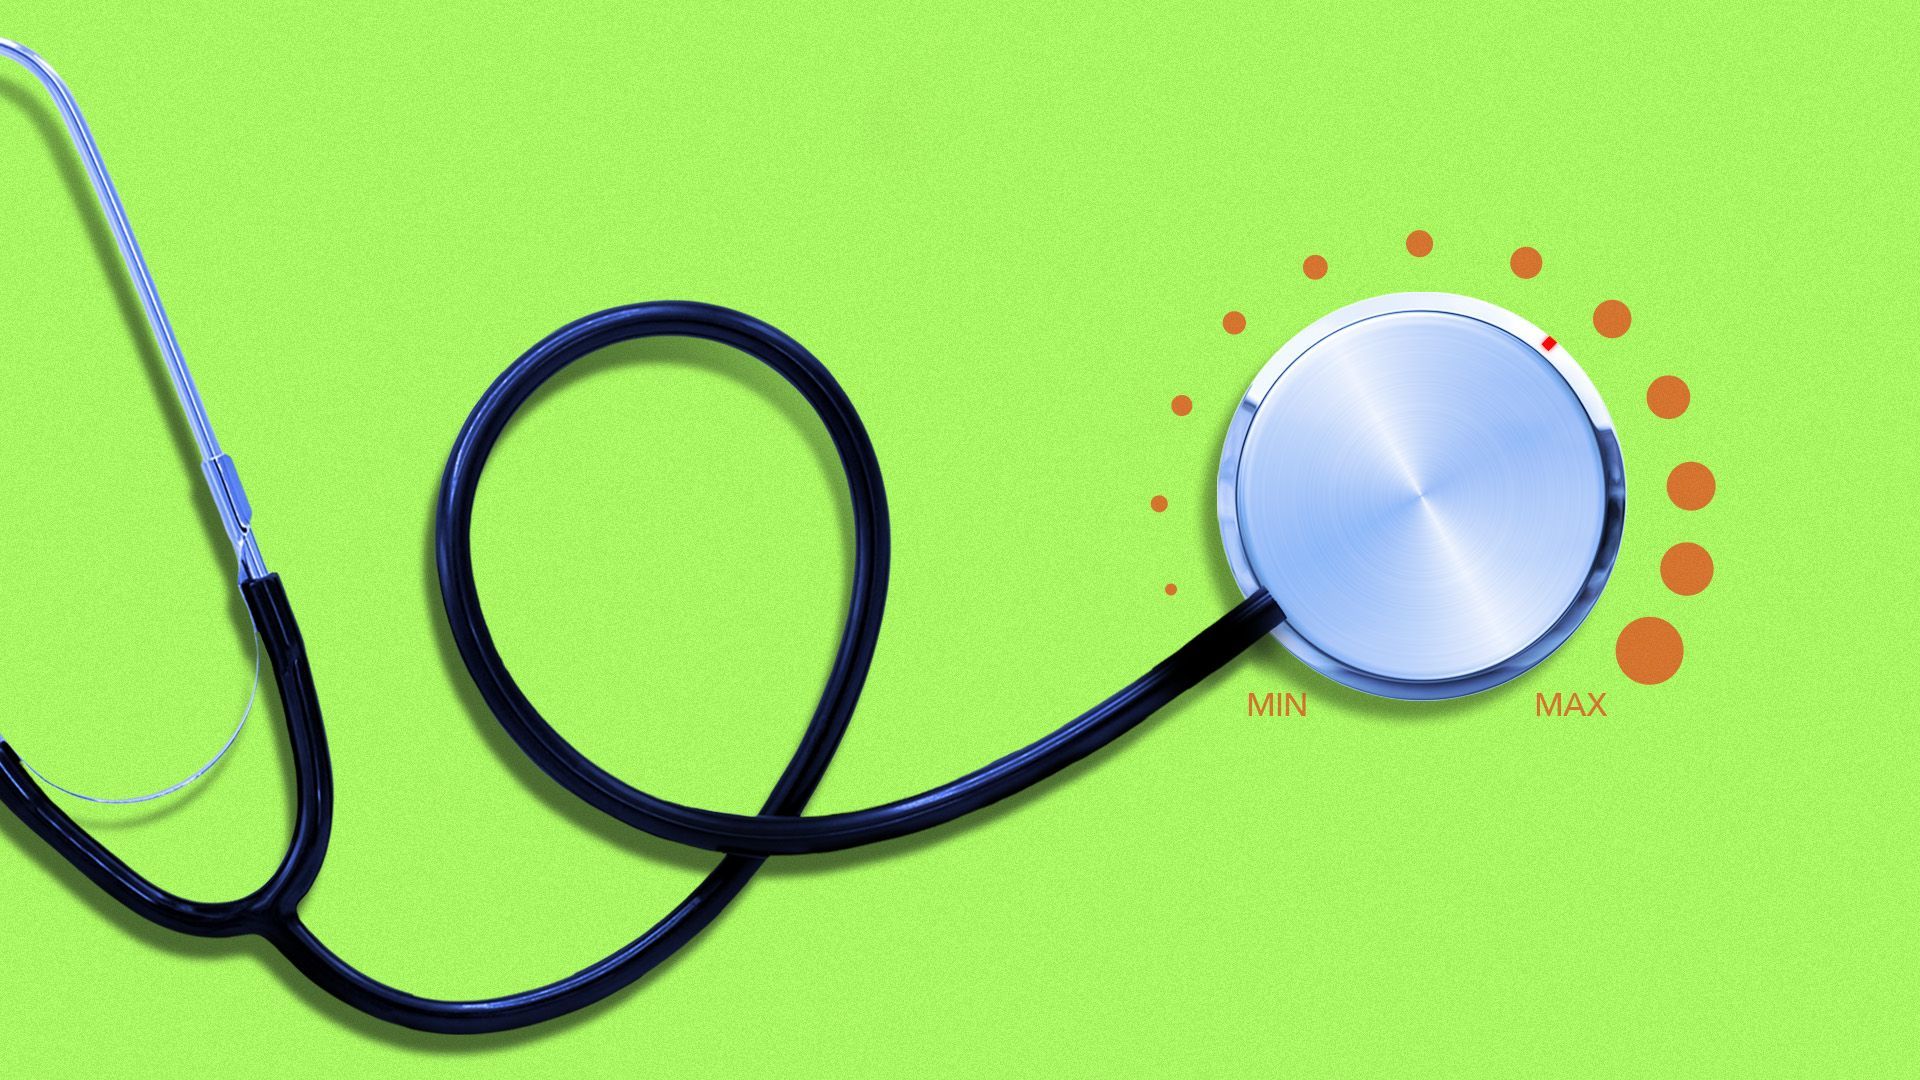 Illustration of a stethoscope with a volume knob at the end